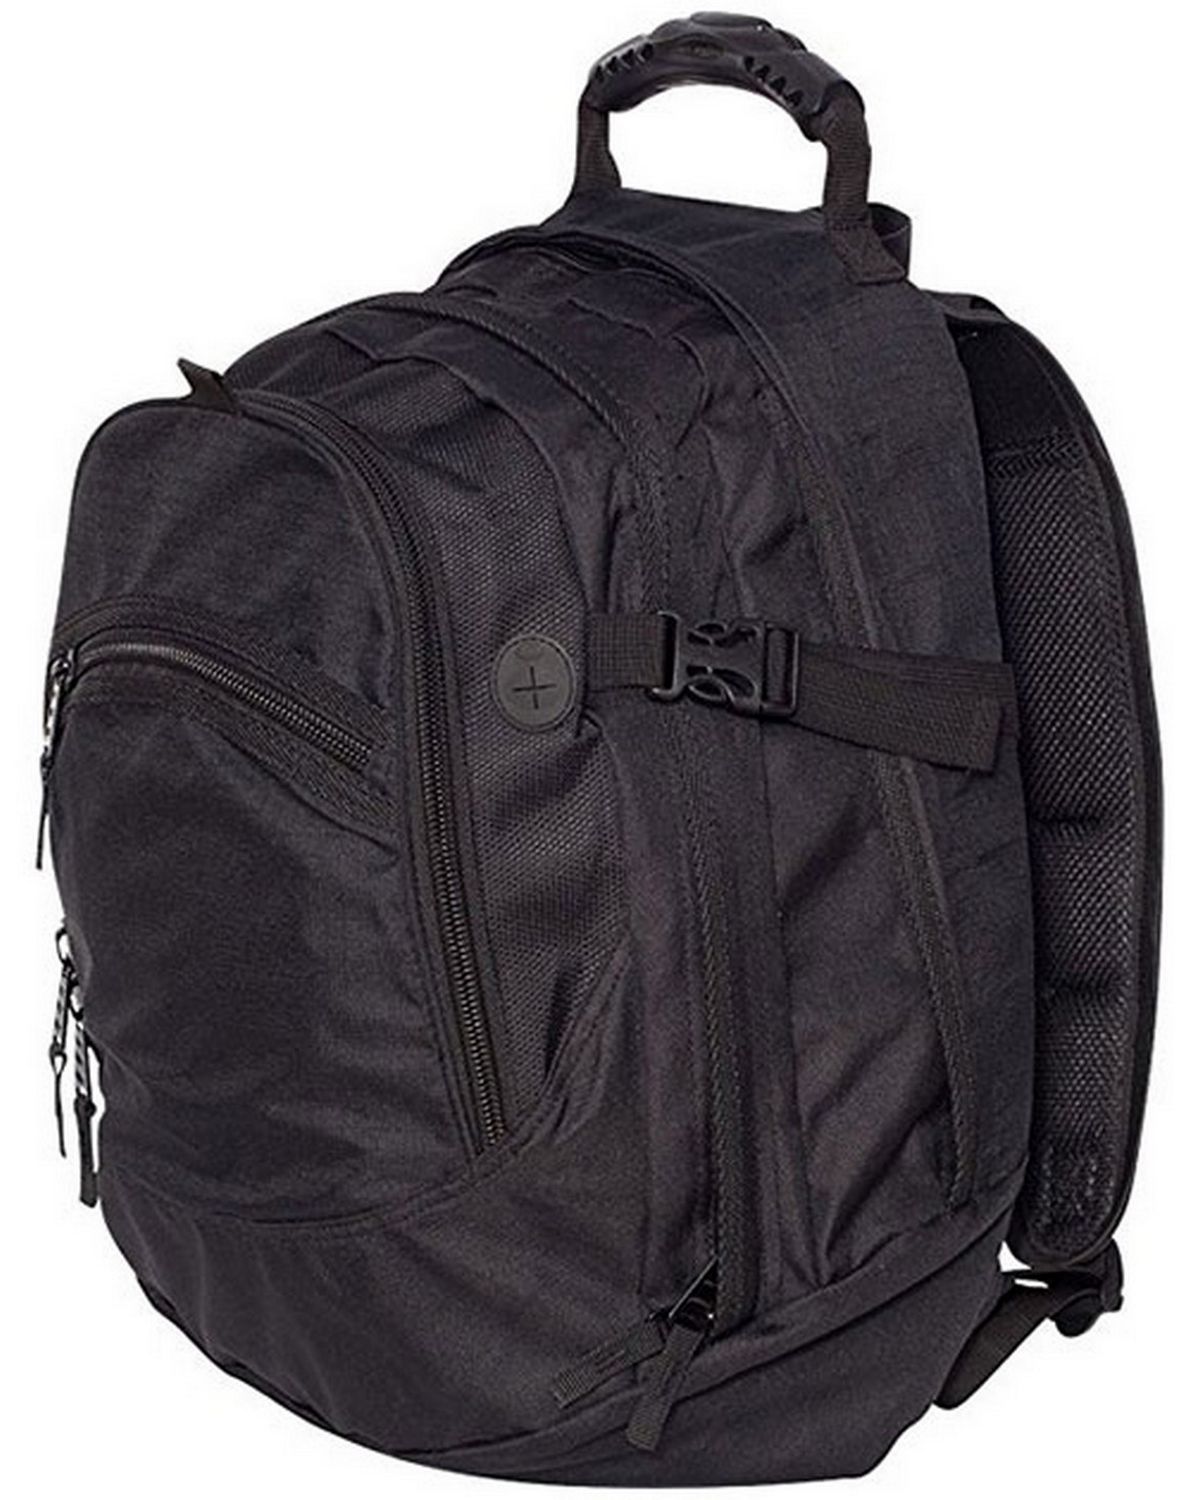 Liberty Bags 7761 Union Square Backpack